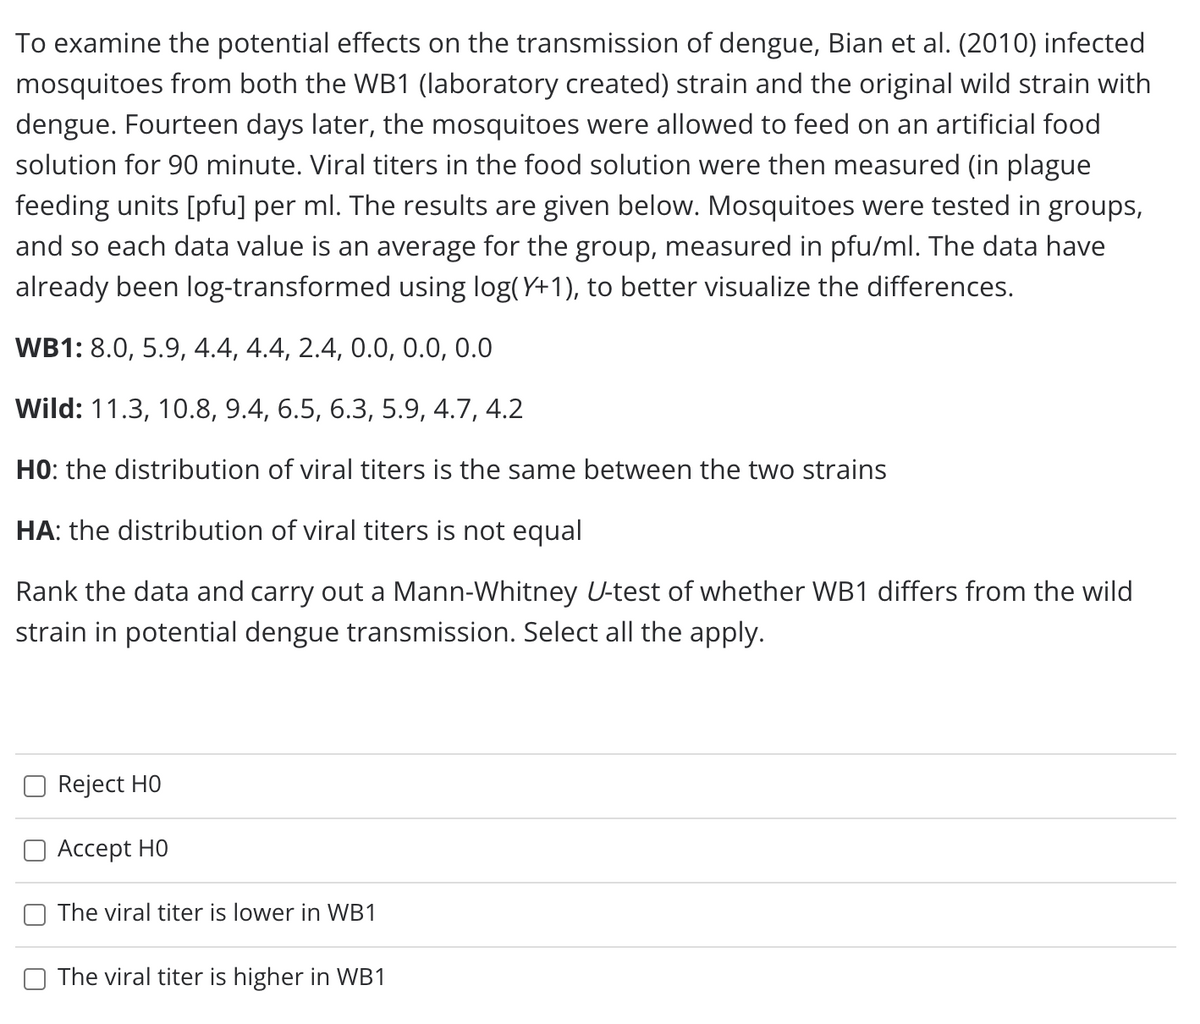 To examine the potential effects on the transmission of dengue, Bian et al. (2010) infected
mosquitoes from both the WB1 (laboratory created) strain and the original wild strain with
dengue. Fourteen days later, the mosquitoes were allowed to feed on an artificial food
solution for 90 minute. Viral titers in the food solution were then measured (in plague
feeding units [pfu] per ml. The results are given below. Mosquitoes were tested in groups,
and so each data value is an average for the group, measured in pfu/ml. The data have
already been log-transformed using log(Y+1), to better visualize the differences.
WB1: 8.0, 5.9, 4.4, 4.4, 2.4, 0.0, 0.0, 0.0
Wild: 11.3, 10.8, 9.4, 6.5, 6.3, 5.9, 4.7, 4.2
HO: the distribution of viral titers is the same between the two strains
HA: the distribution of viral titers is not equal
Rank the data and carry out a Mann-Whitney U-test of whether WB1 differs from the wild
strain in potential dengue transmission. Select all the apply.
Reject HO
Аcсept HO
The viral titer is lower in WB1
The viral titer is higher in WB1
